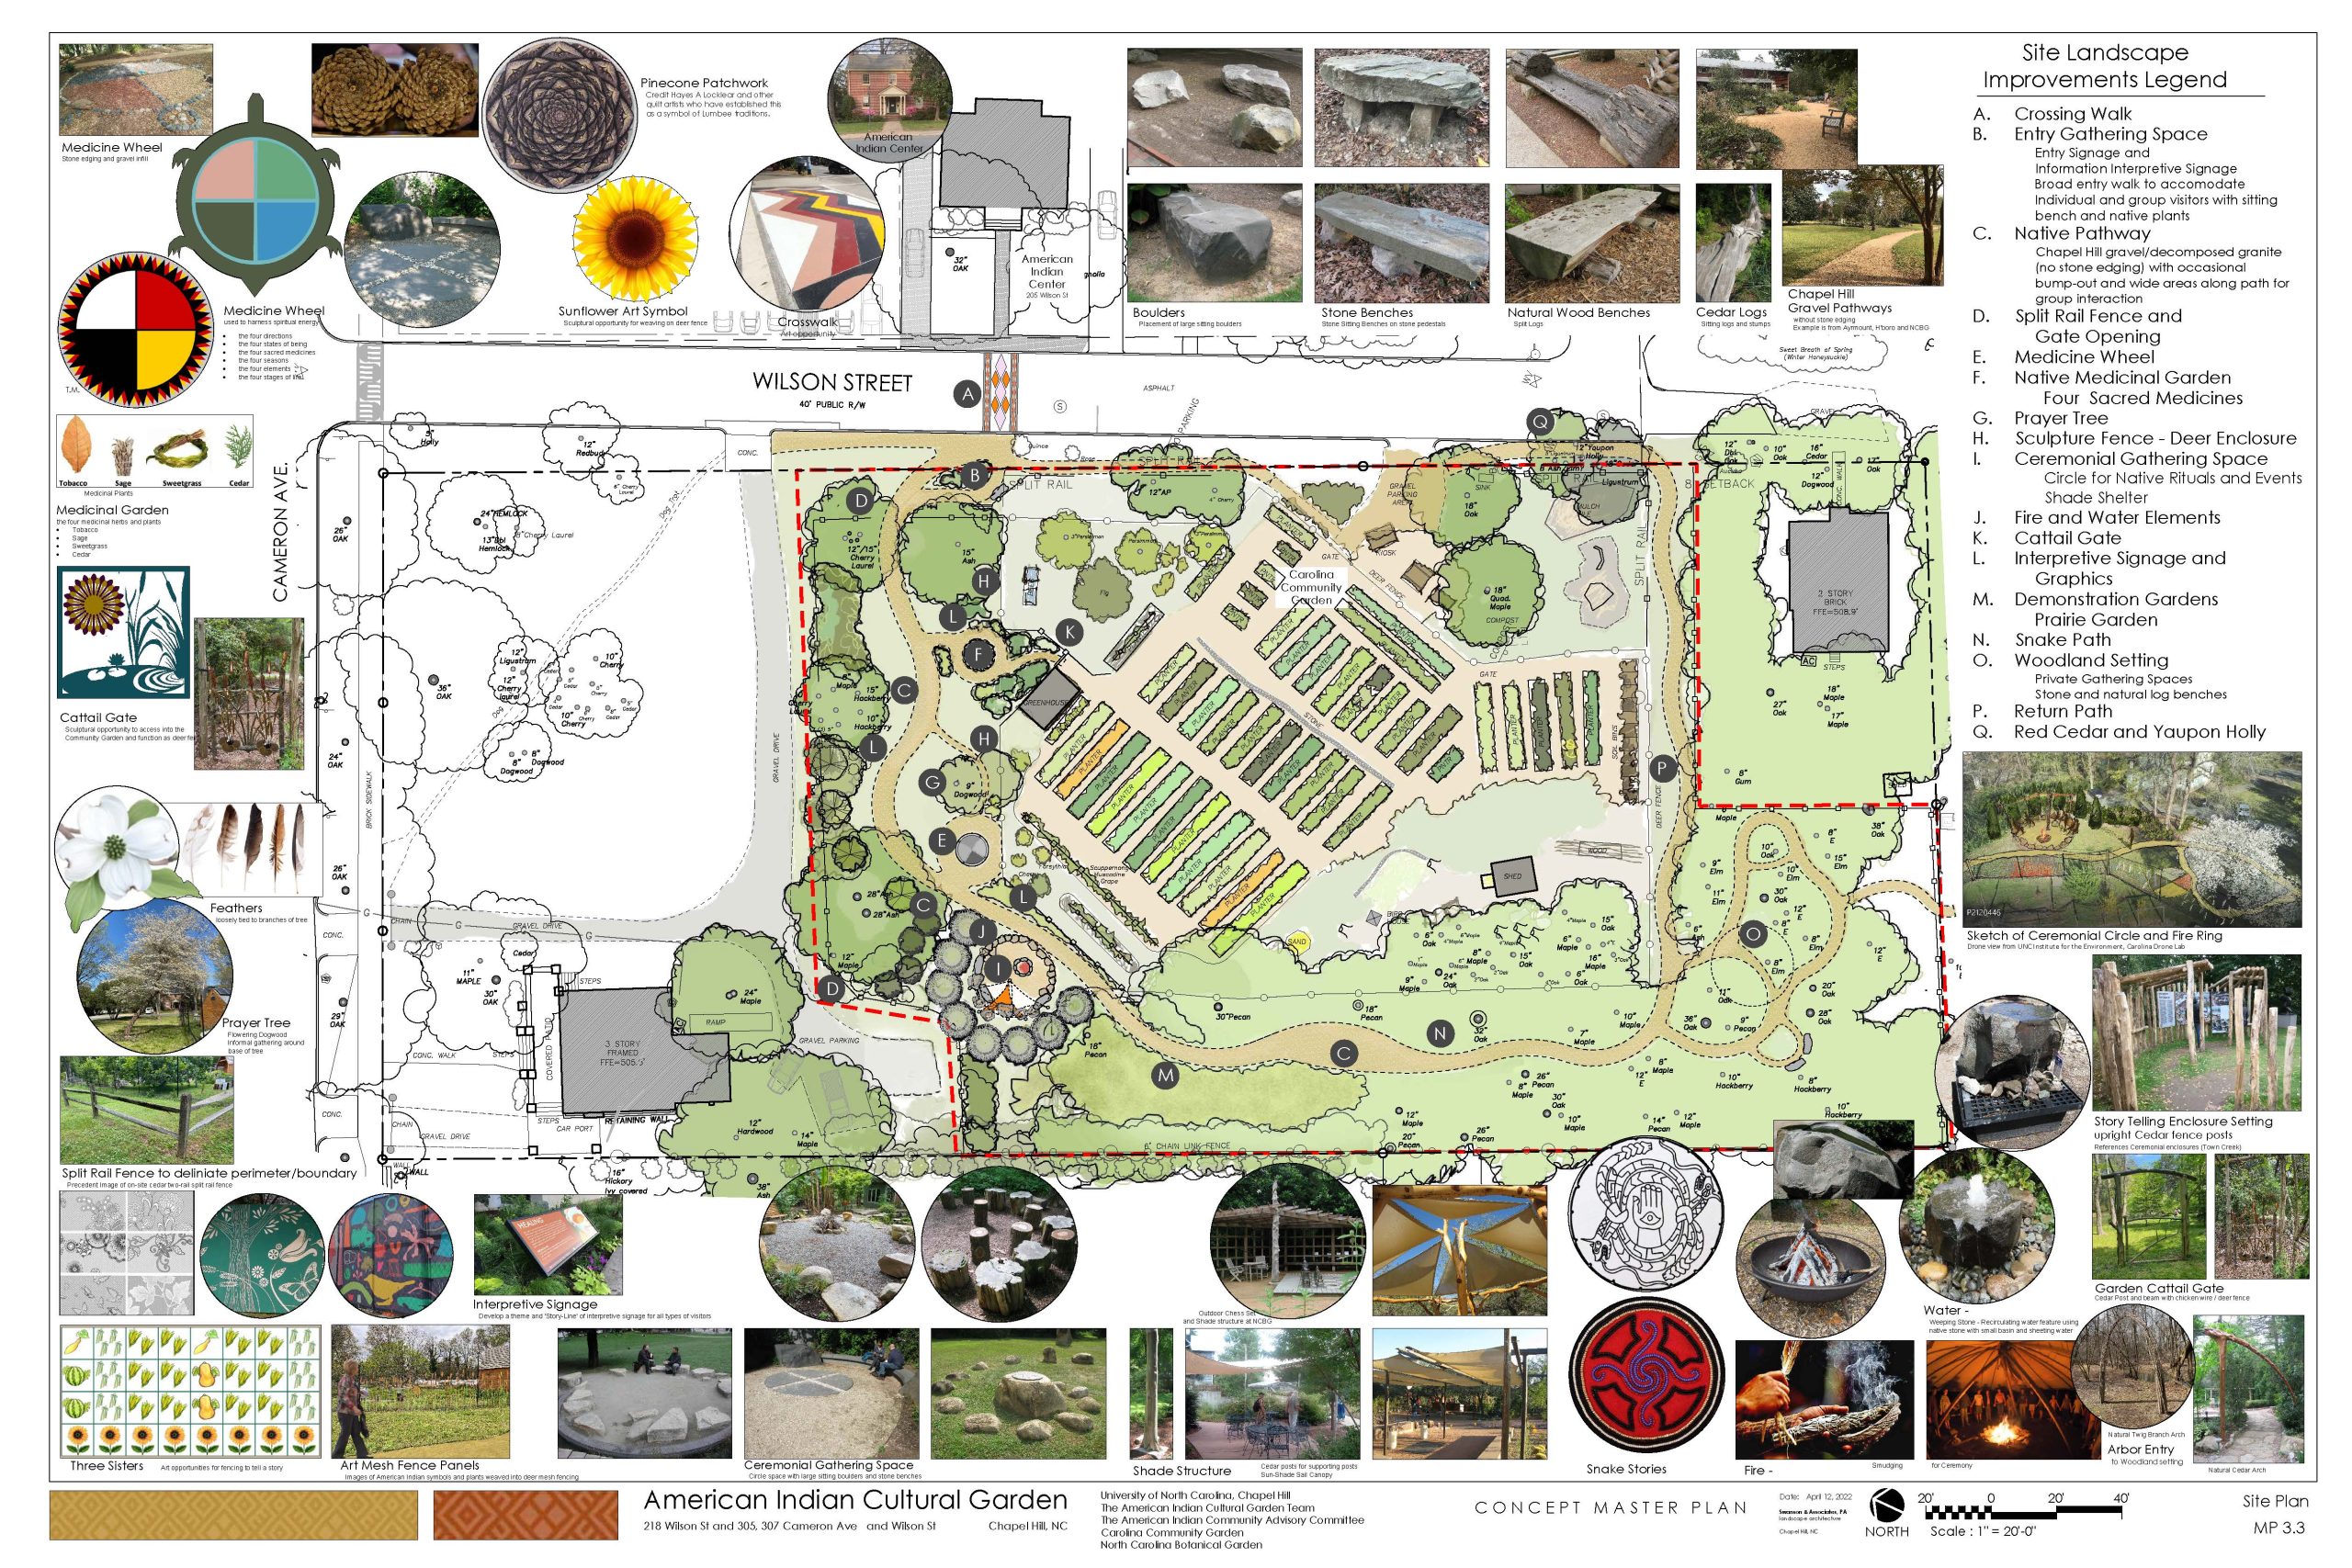 A plan for the American Indian Cultural Garden